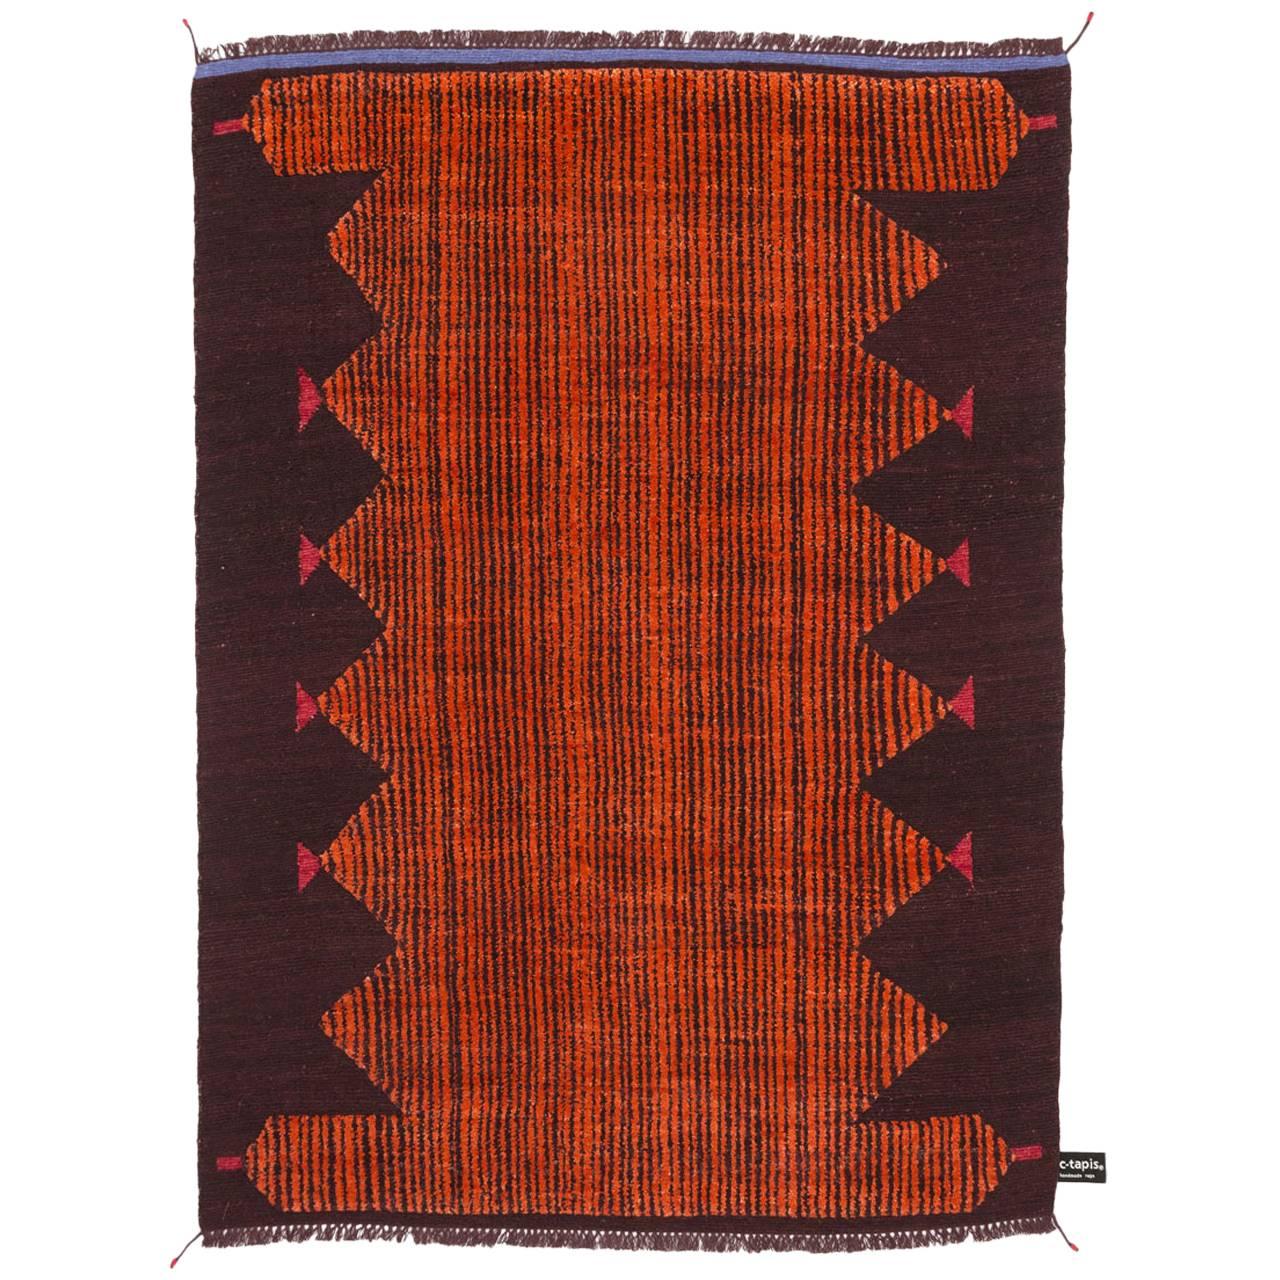 "Primitive Weave Four" Rug Designed by Chiara Andreatti for cc-tapis